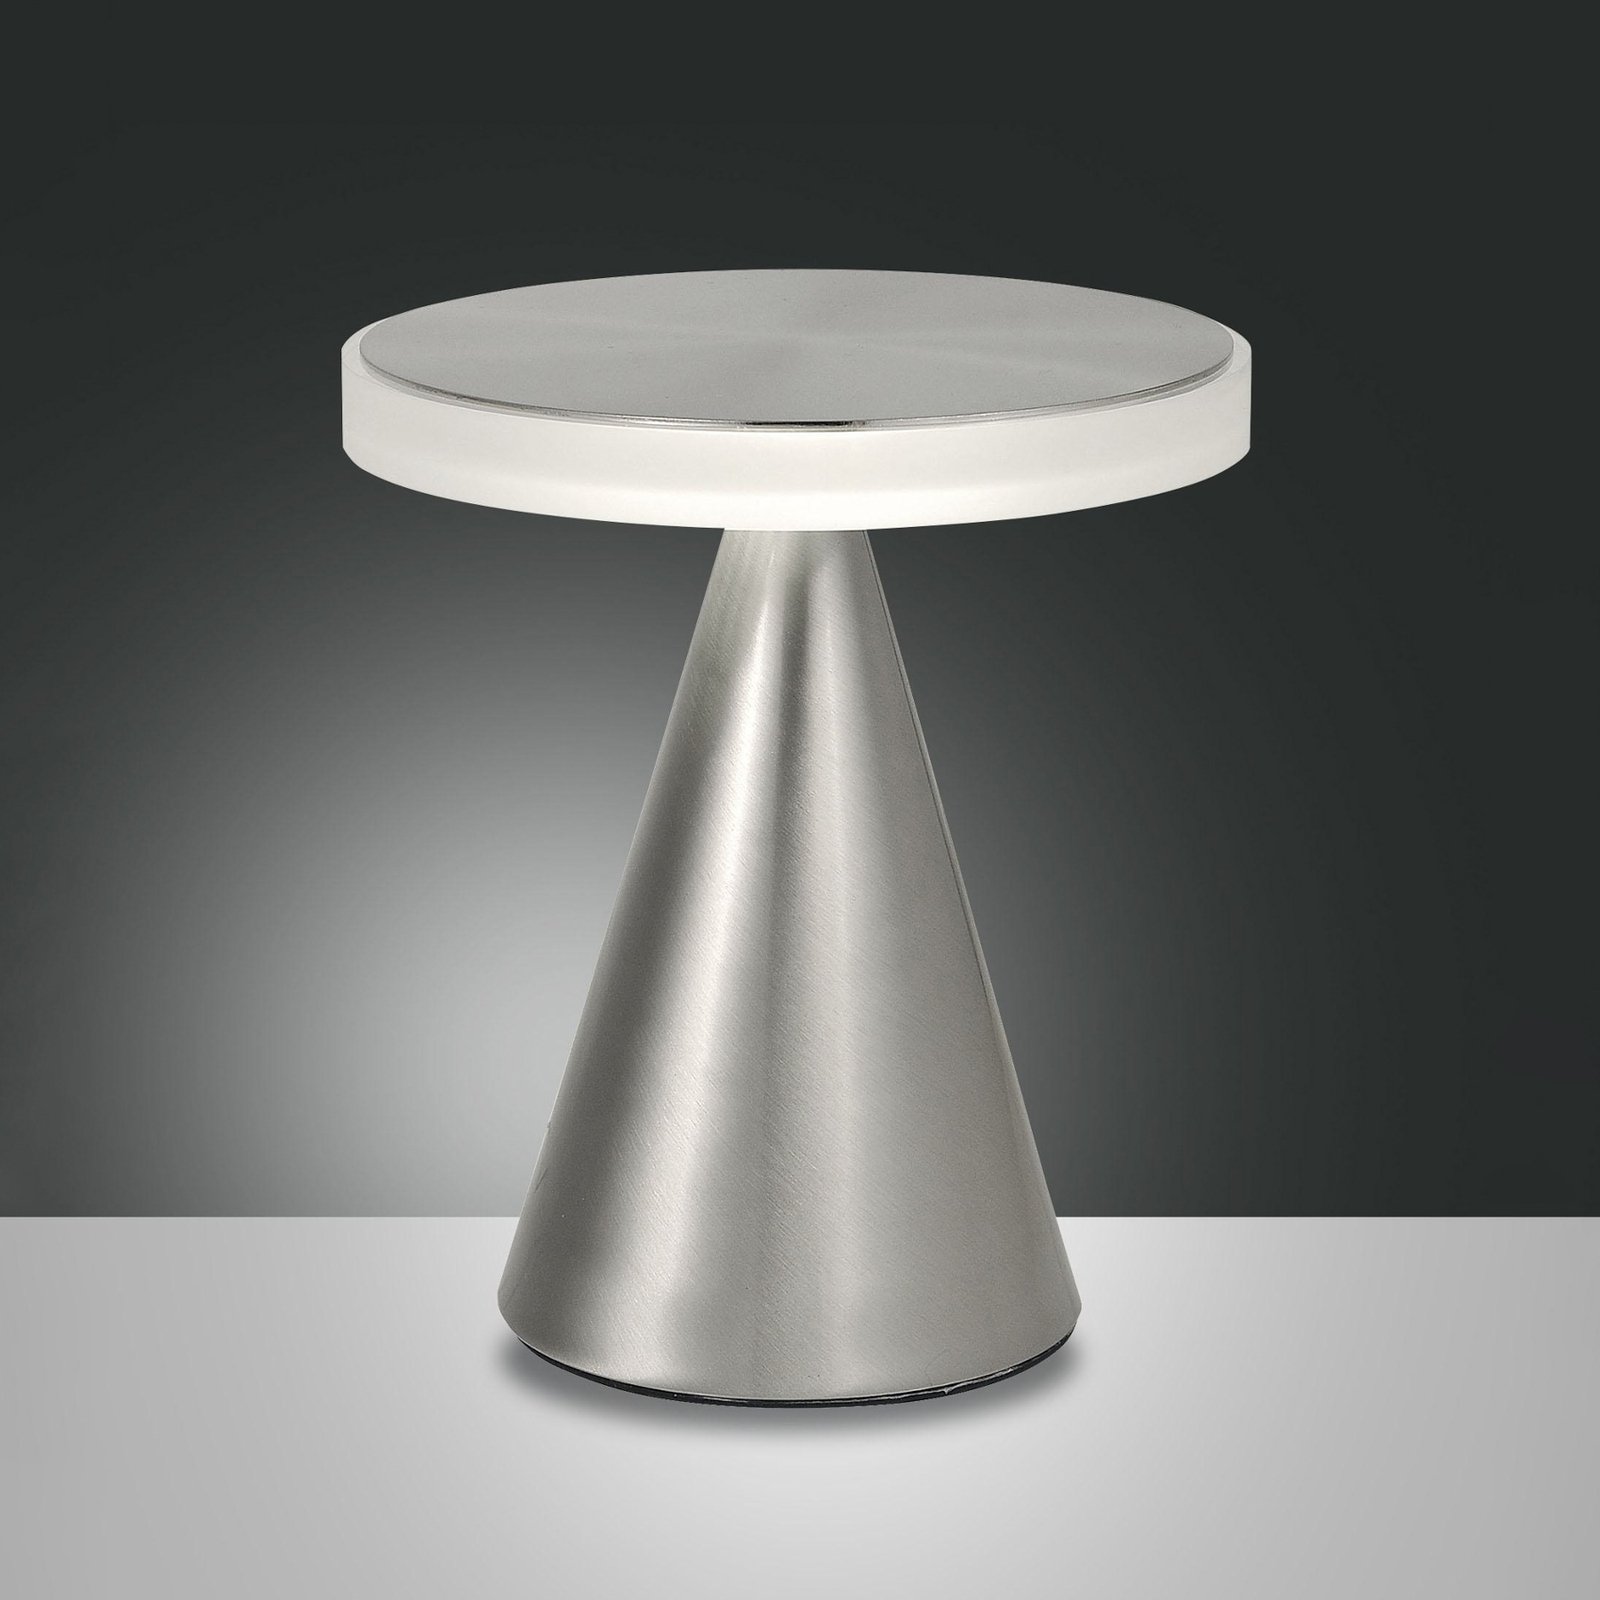 LED table lamp Neutra, height 27 cm, nickel, touch dimmer